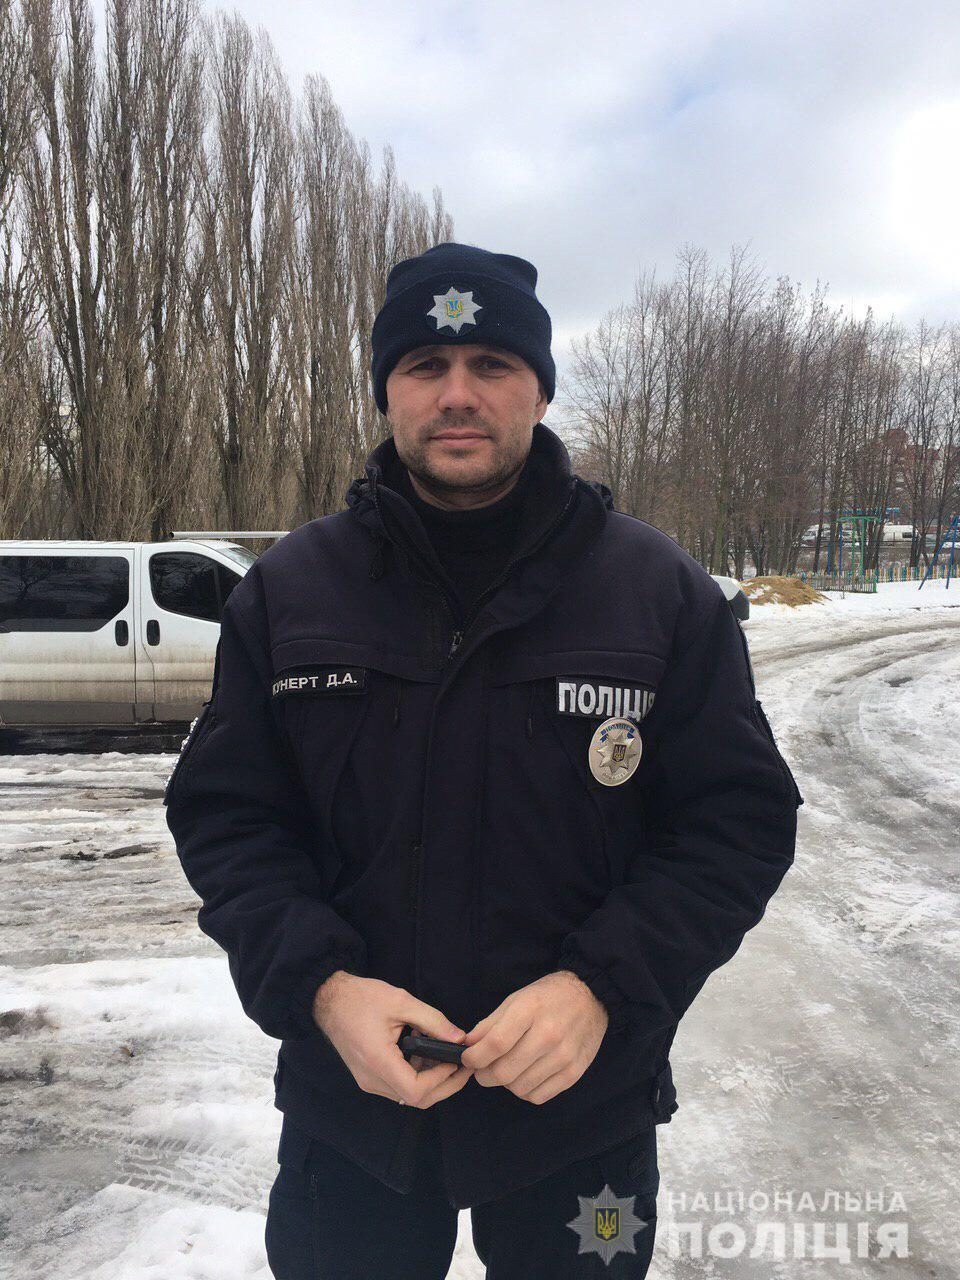 A POLICE GUARD SAVED A MAN’S LIFE IN POLTAVA